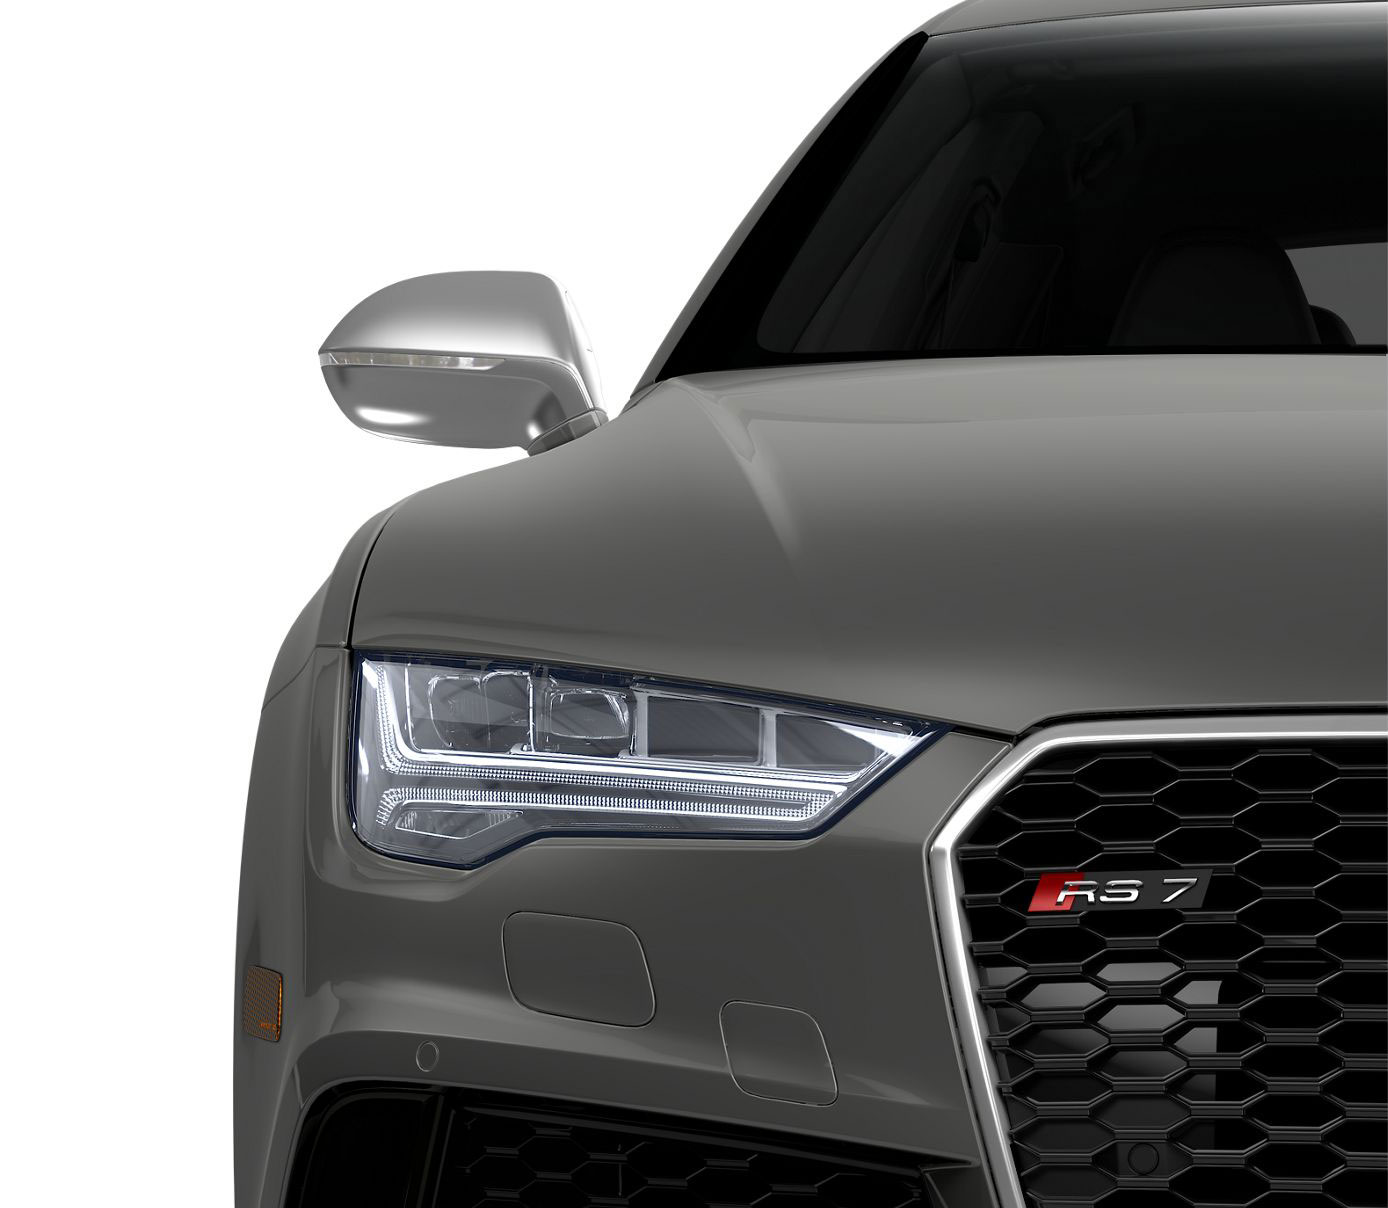 Audi RS7 2016 front view